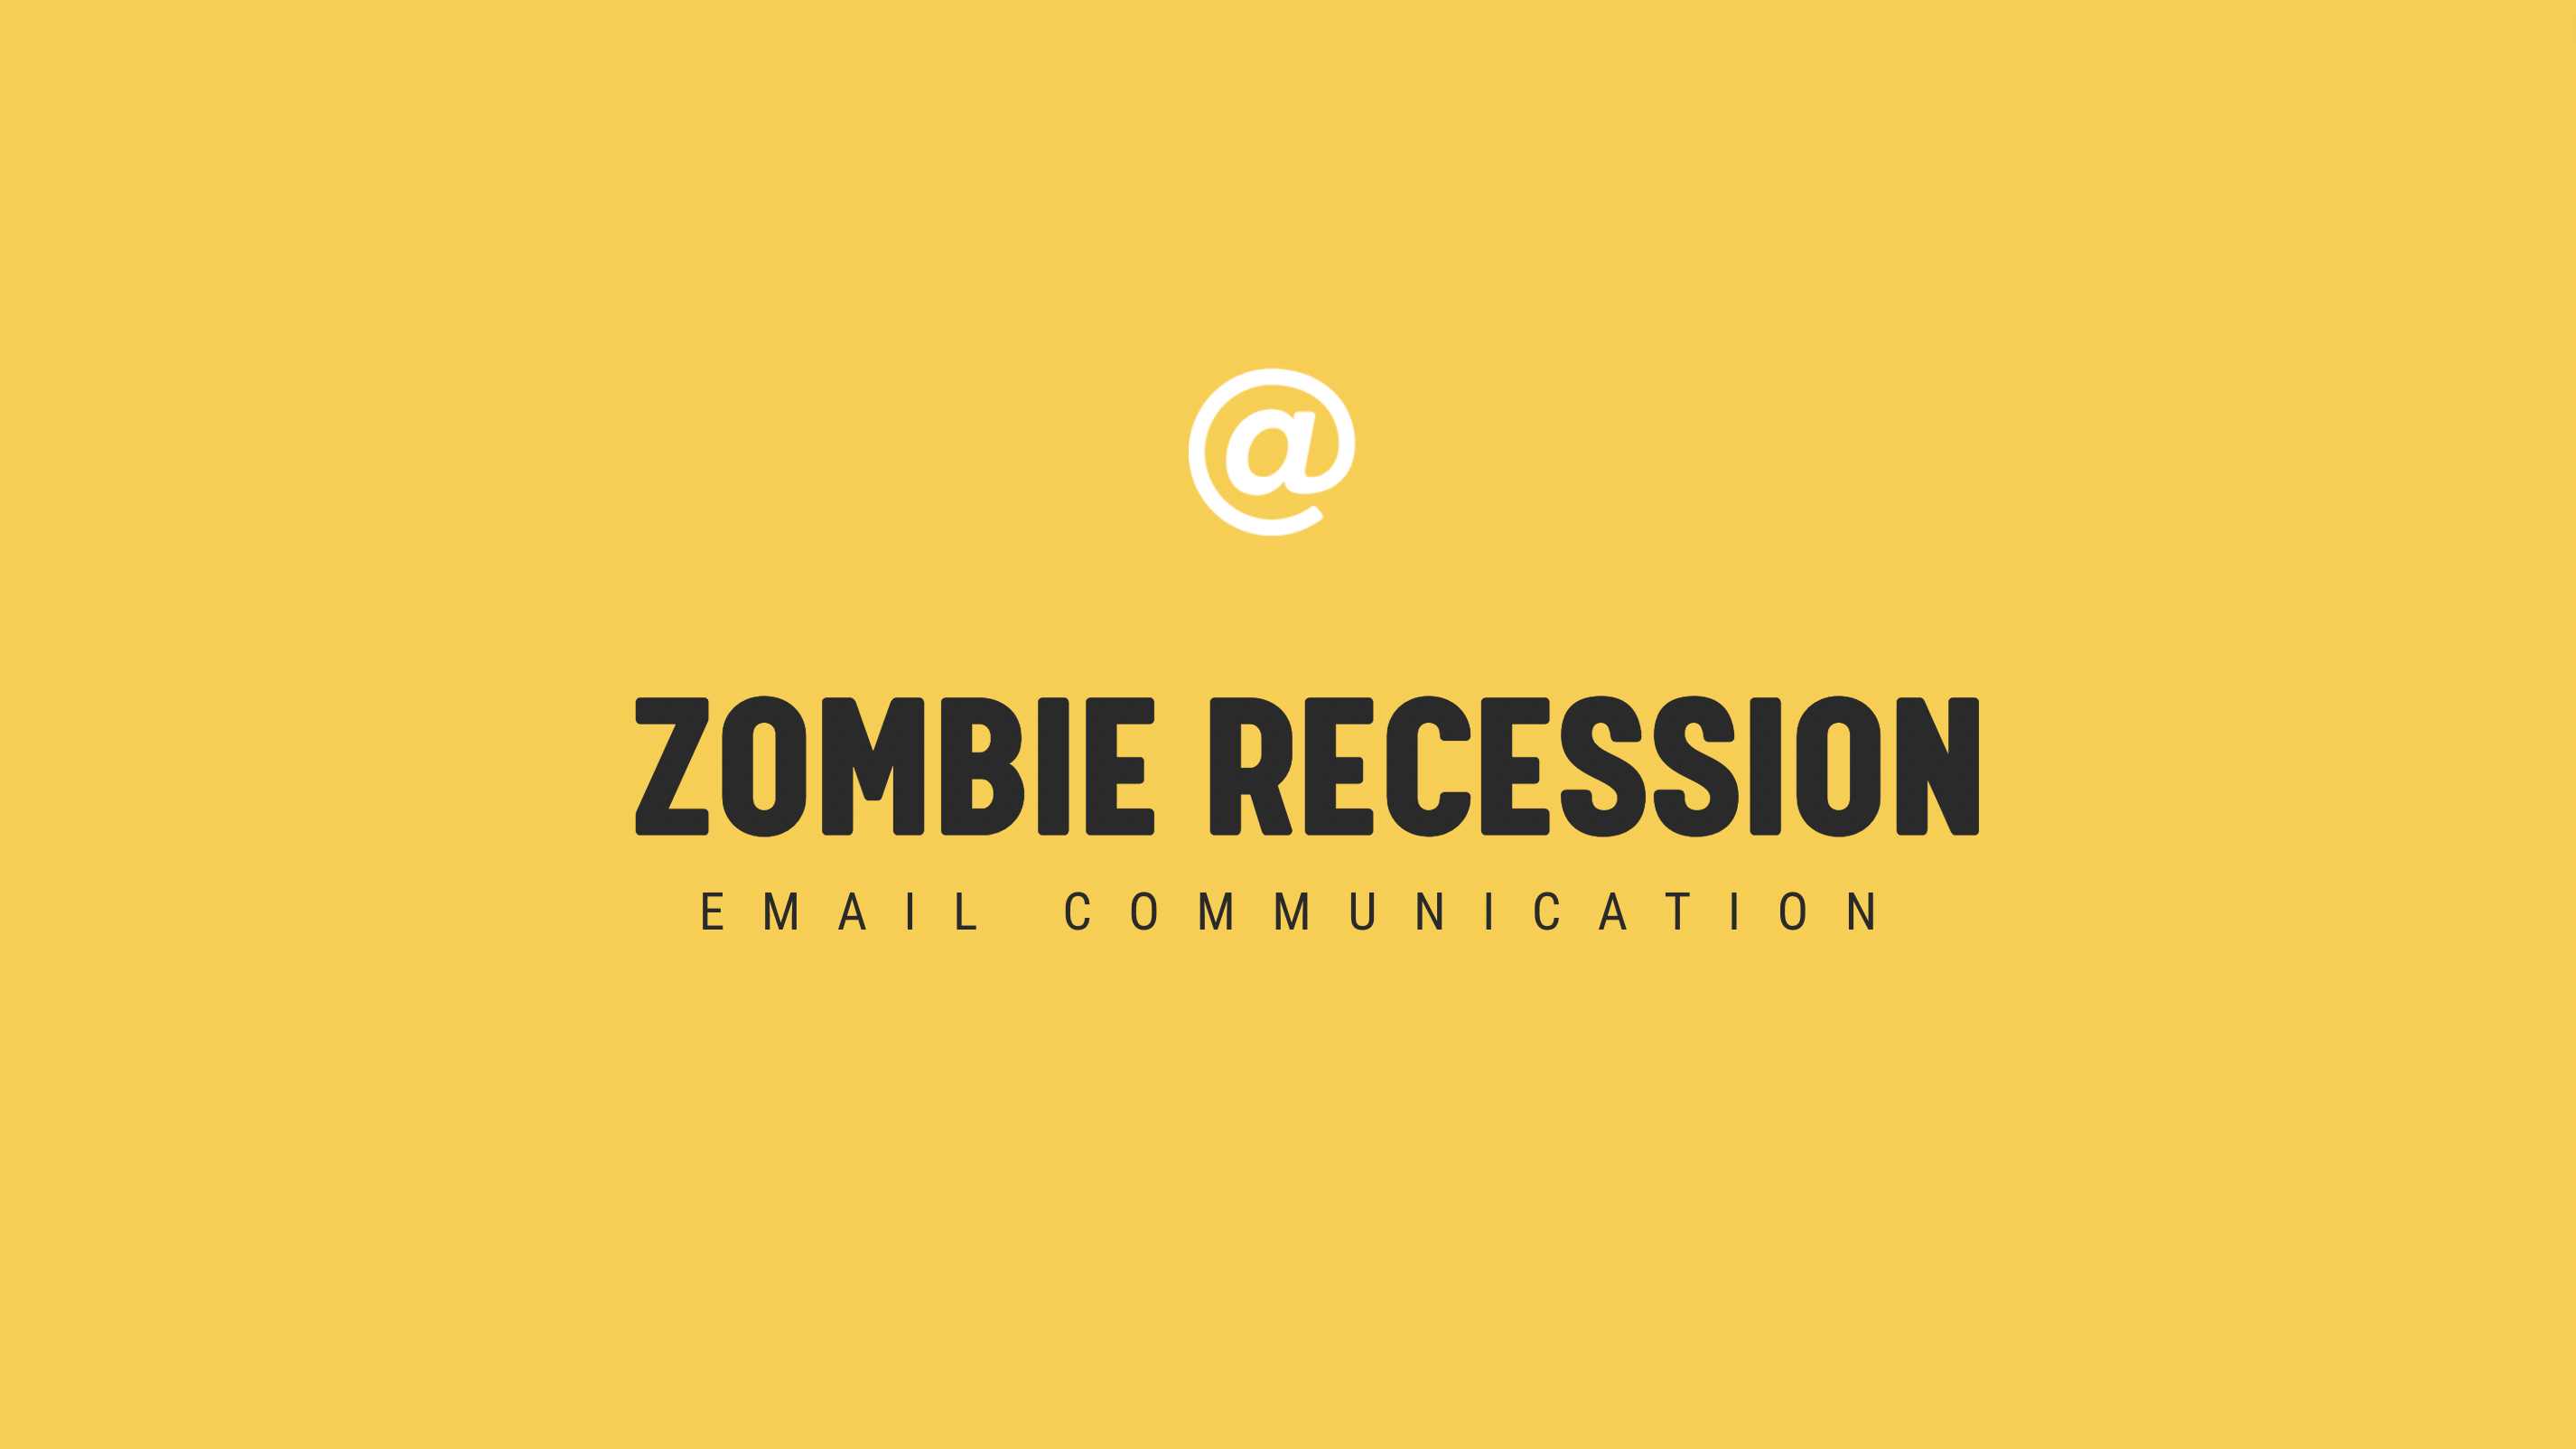 [NEW] Zombie Recession - Timely Email